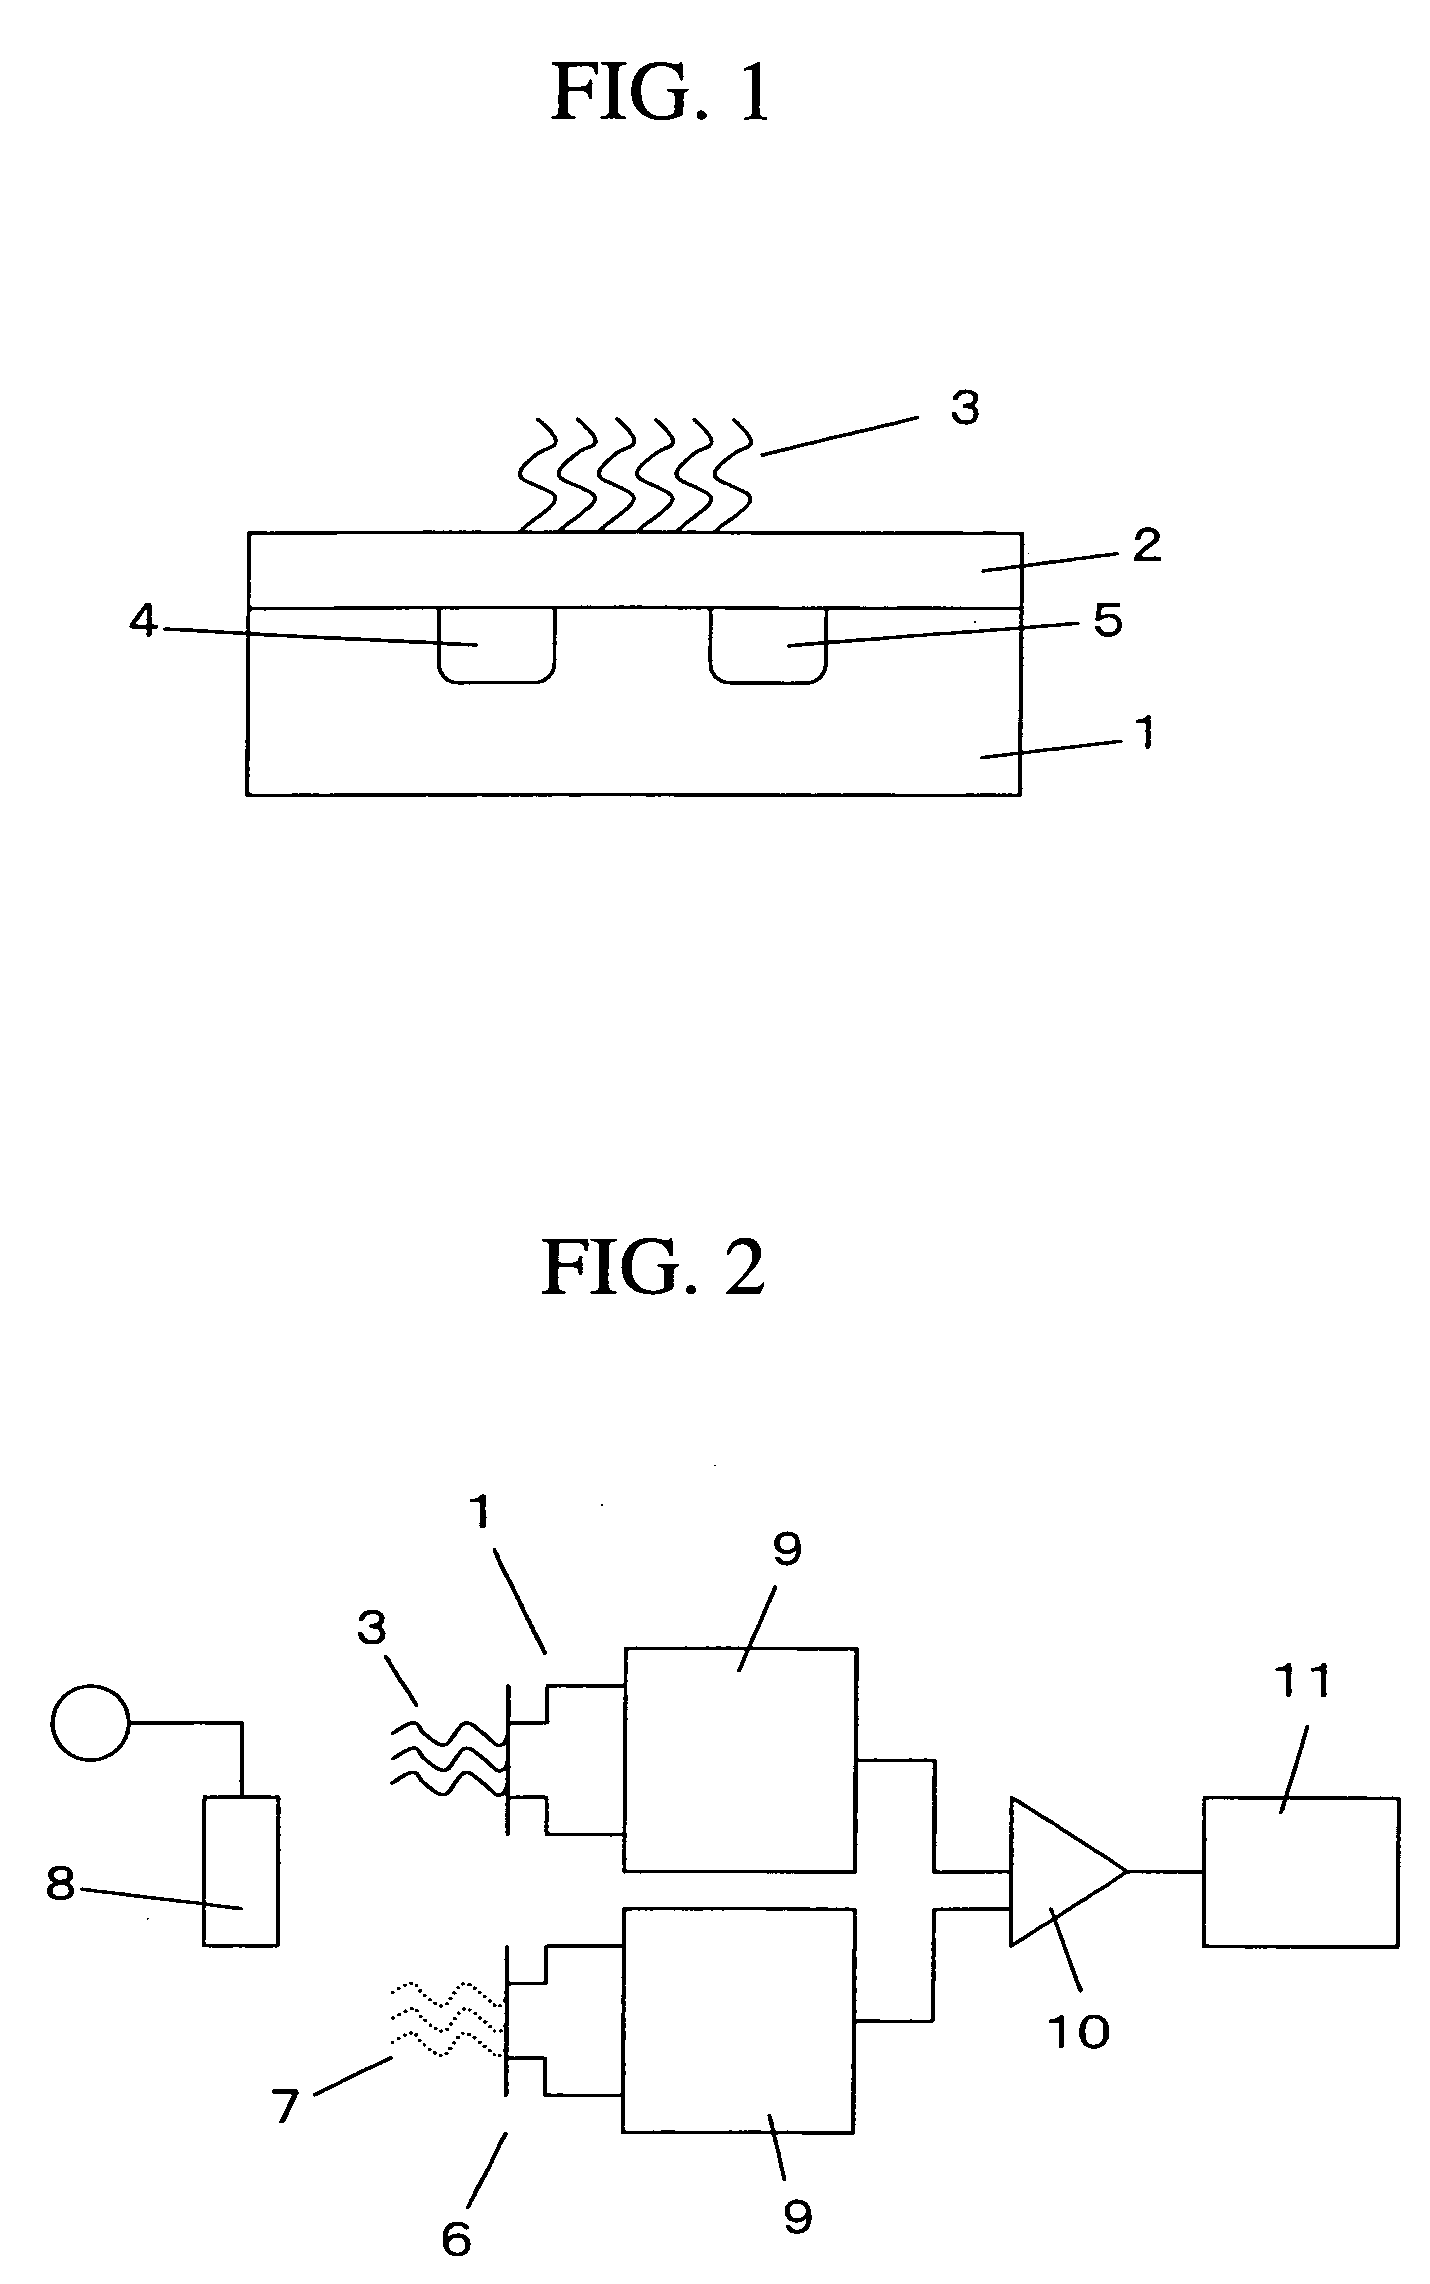 Potentiometric dna microarray, process for producing the same and method of analyzing nucleic acid